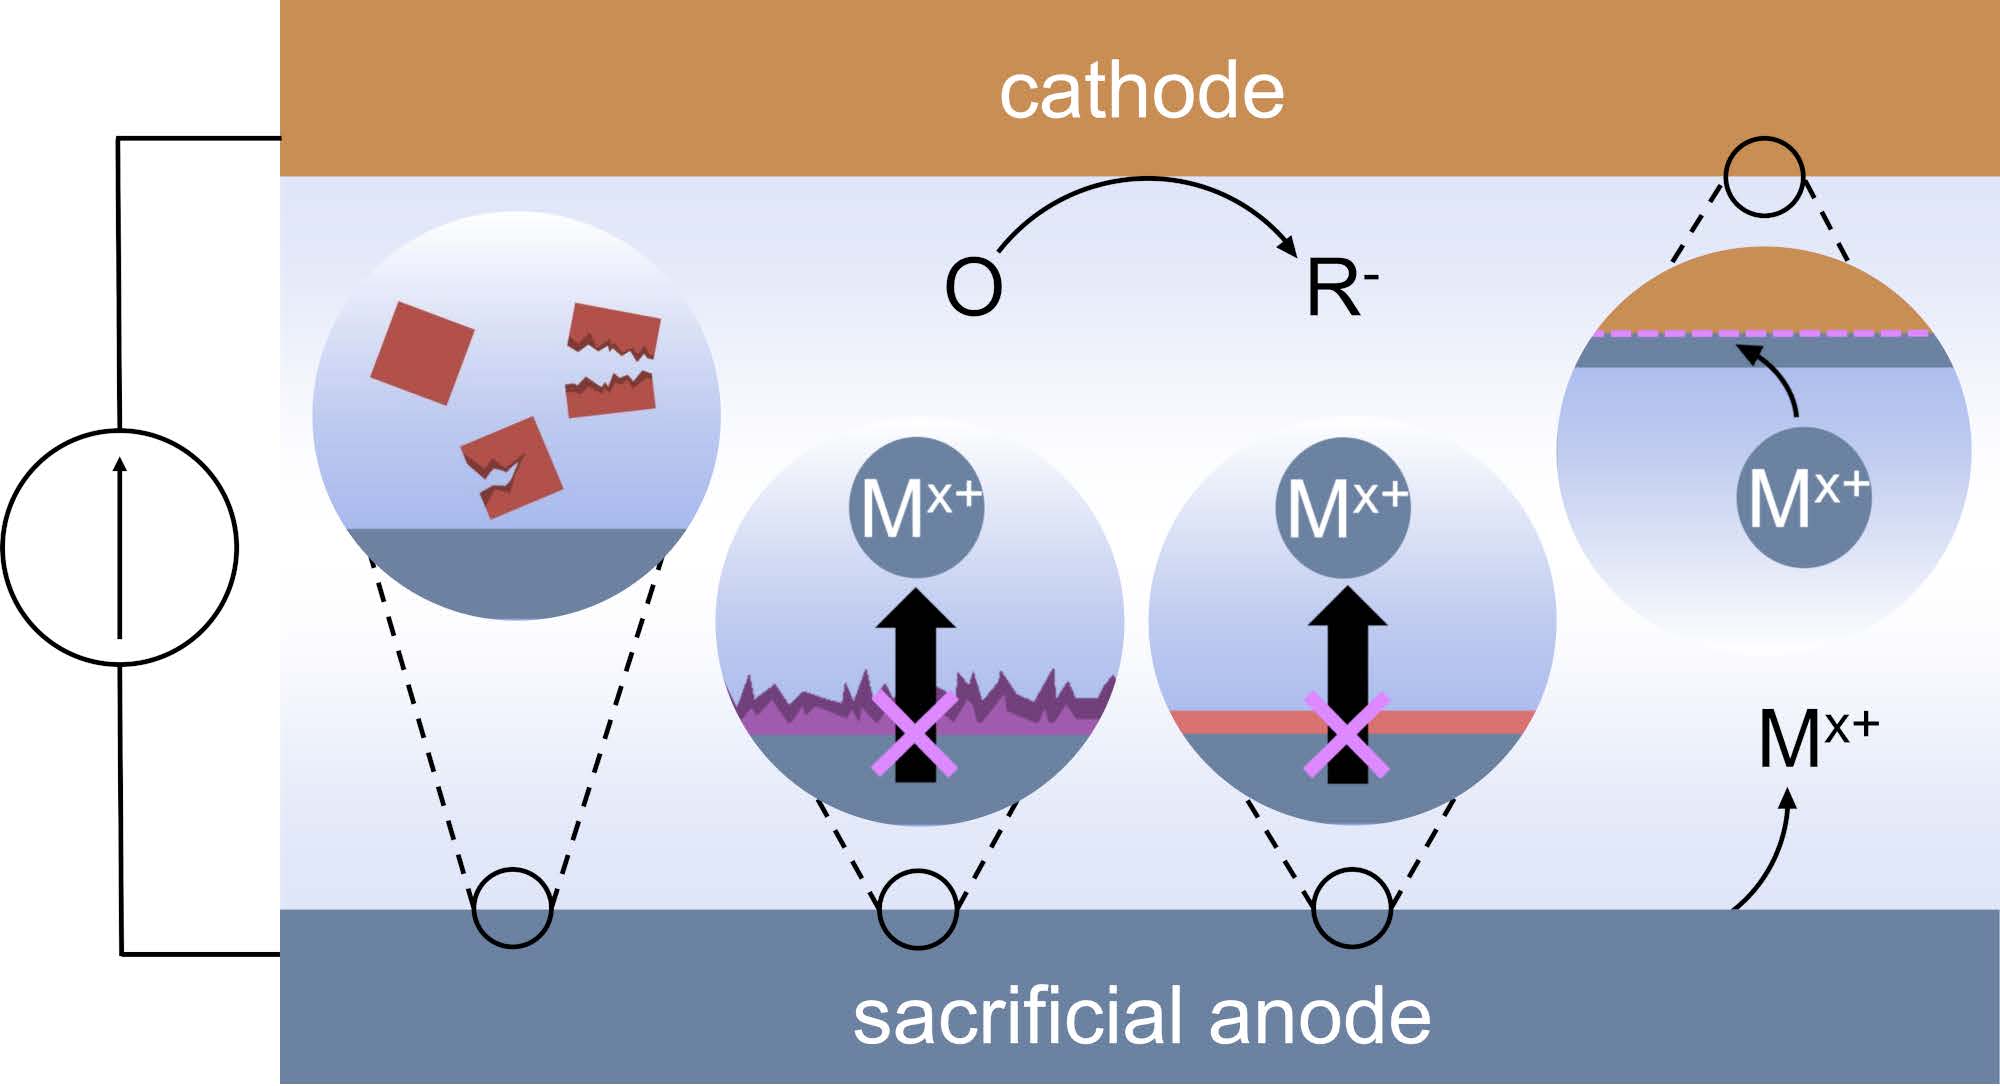 TOC graphic for "A Guide to Troubleshooting Metal Sacrificial Anodes for Organic Electrosynthesis"